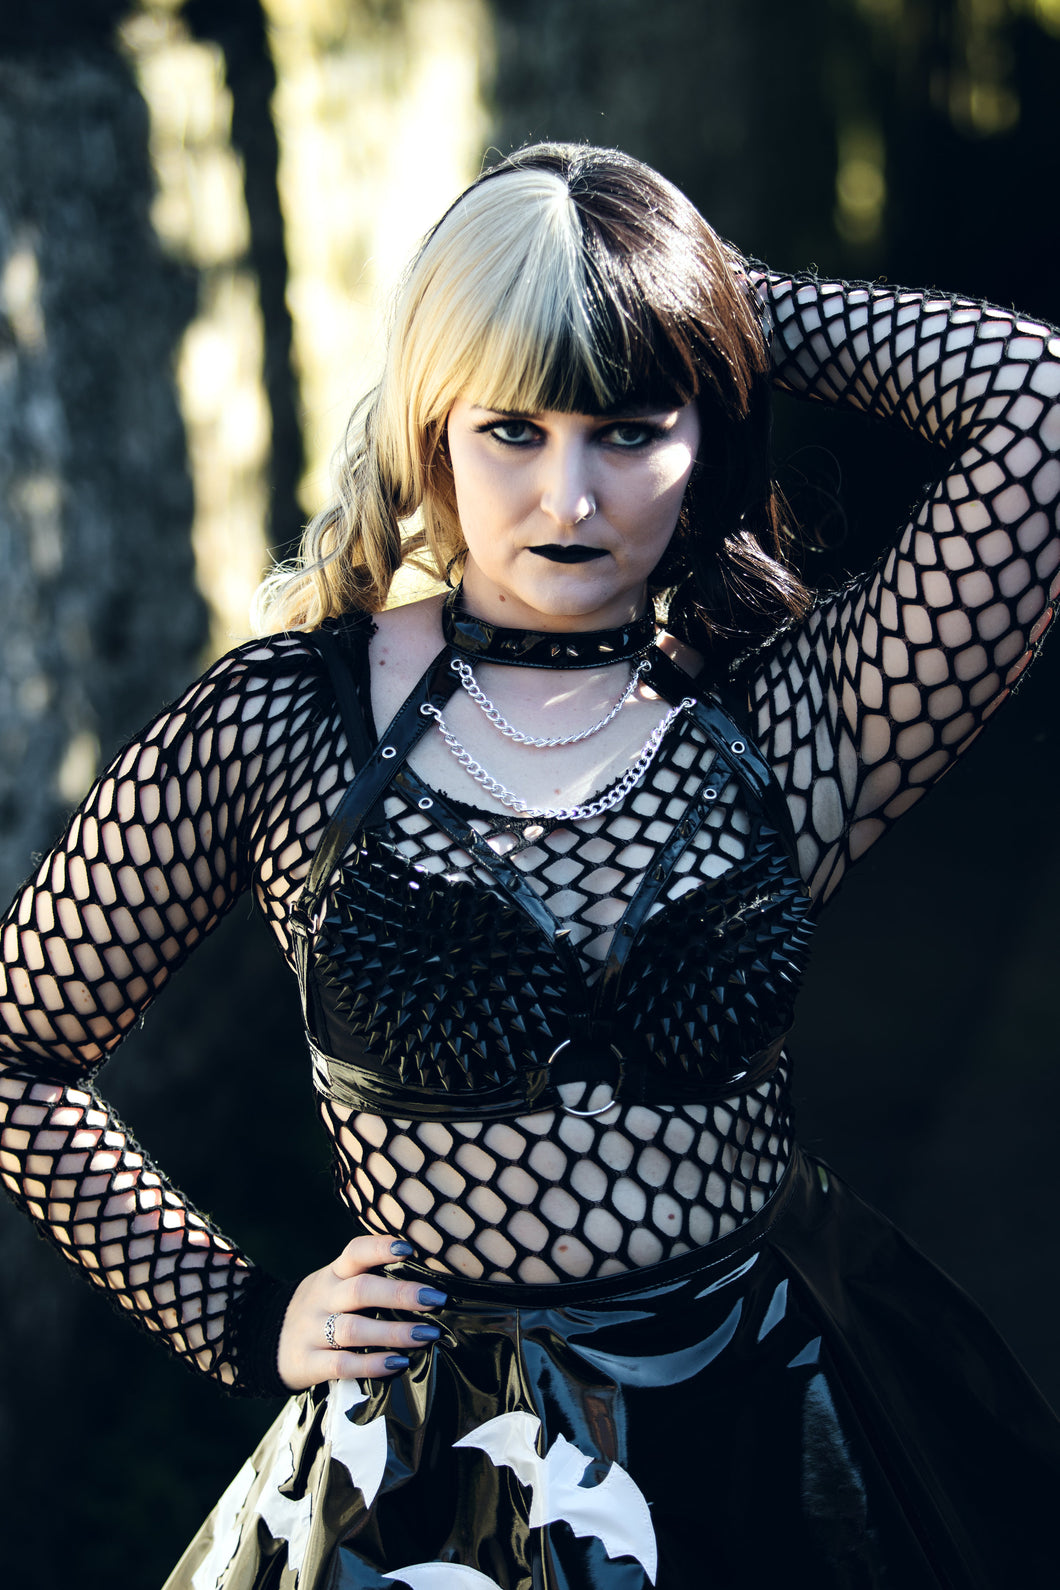 Gothic harness with chains and spikes